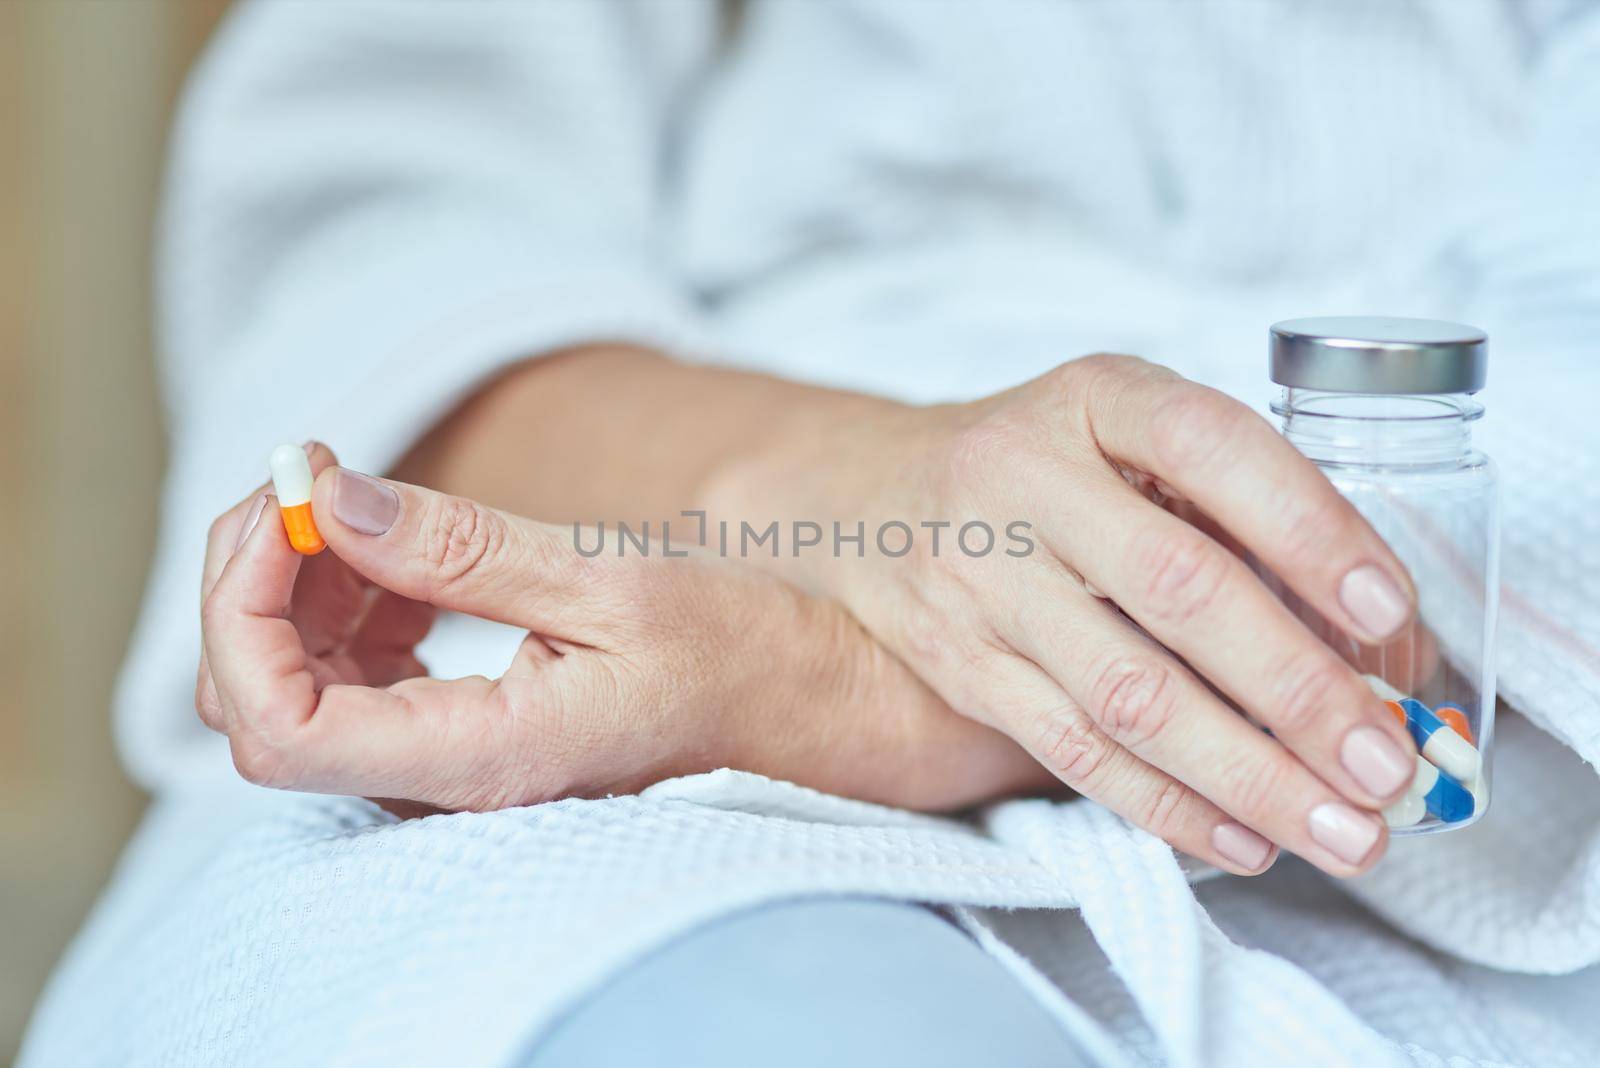 Woman sitting with crossed hands holding pill and pill bottle in manicured fingers, close up view of hands. Beauty and cosmetology concept